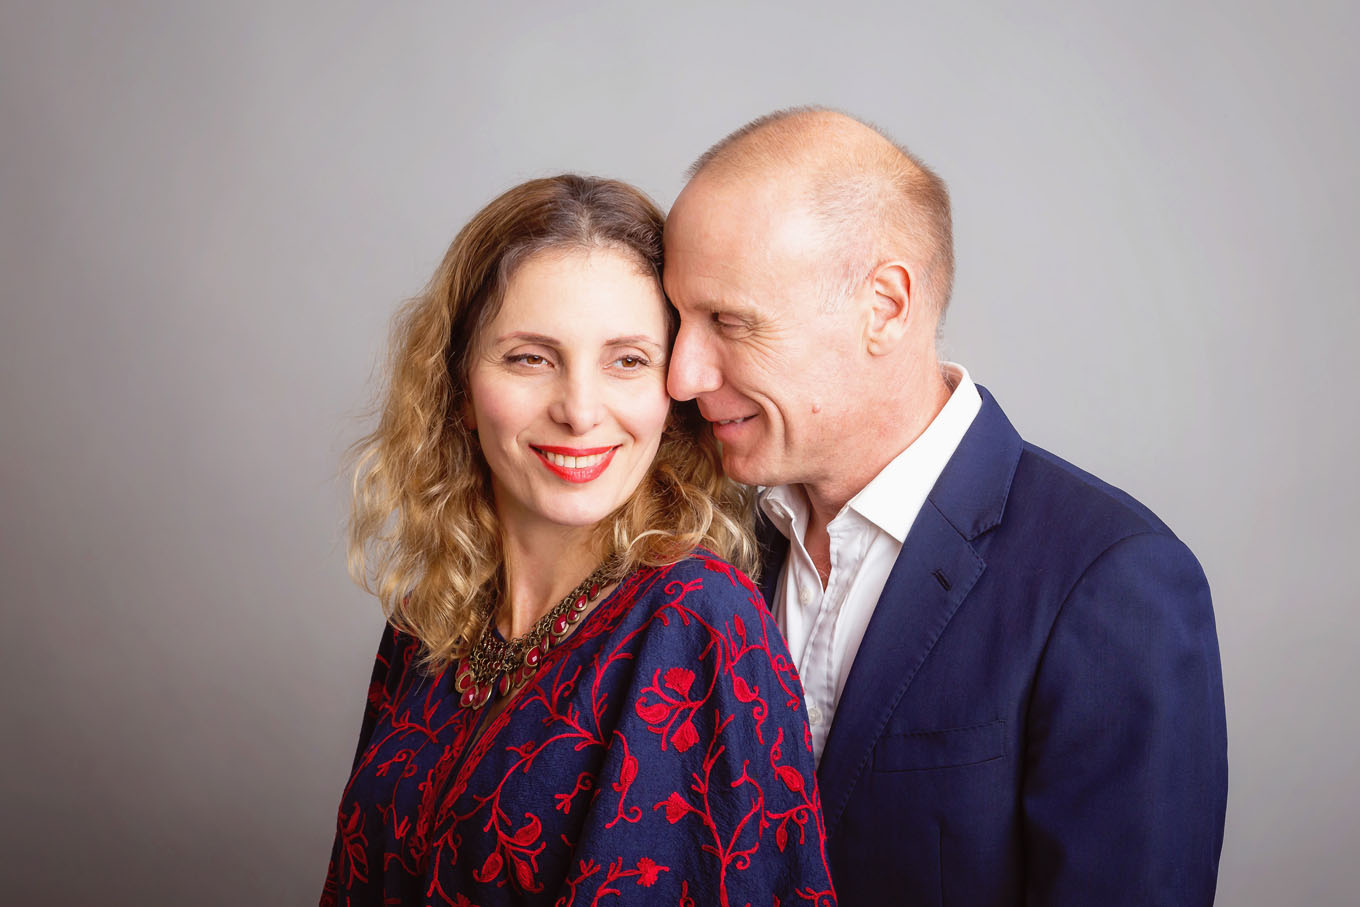 A portrait of a couple taken in a studio set up with backdrop and lighting equipment